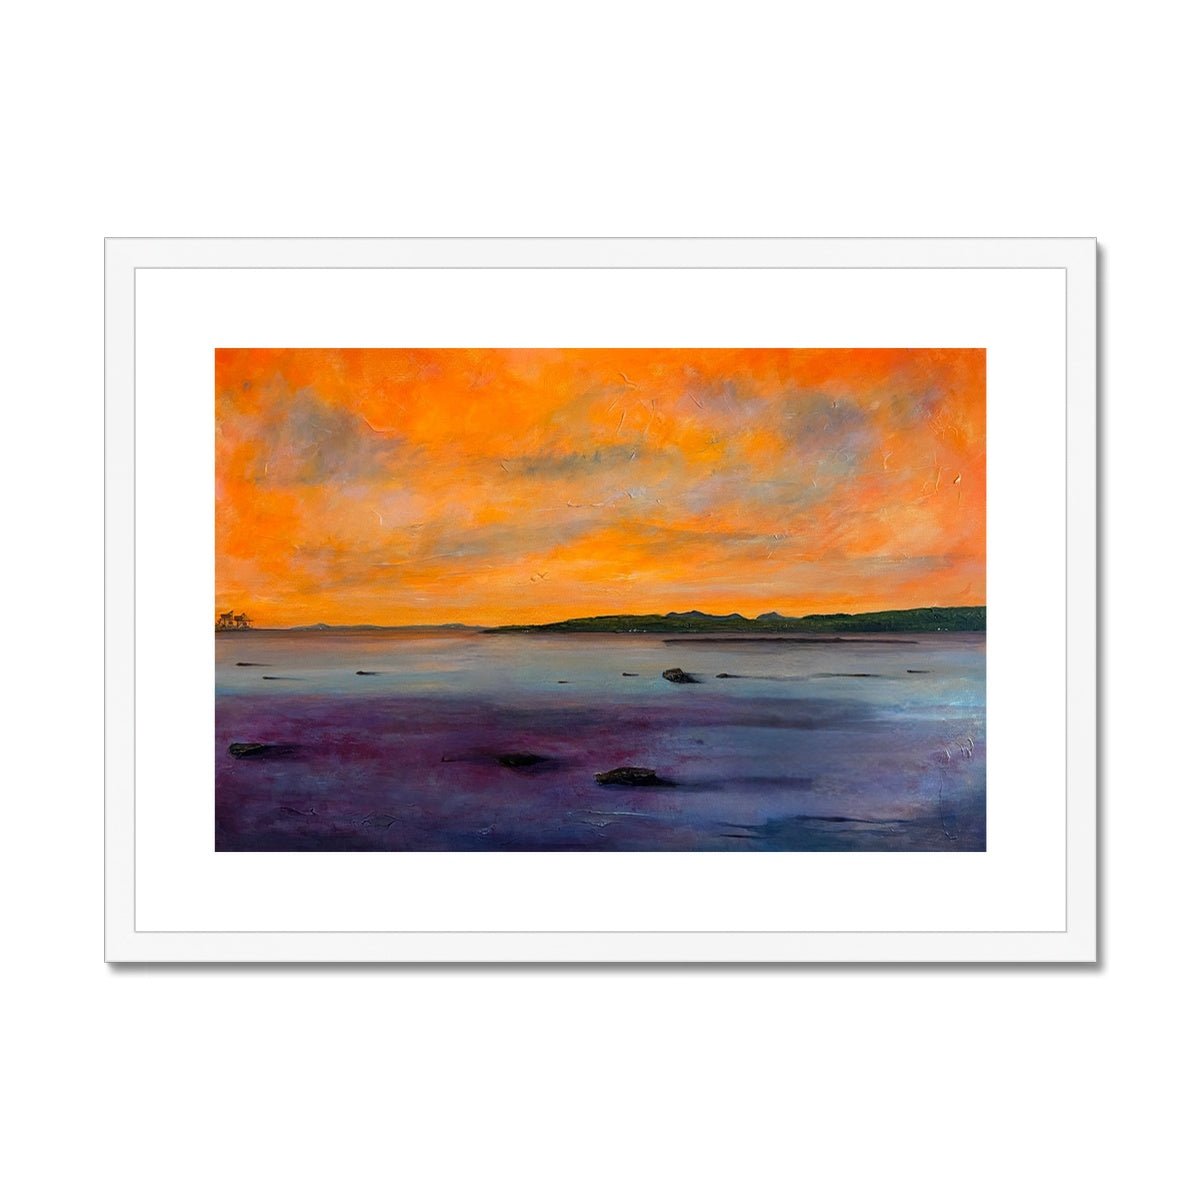 Looking From Largs Painting | Framed & Mounted Prints From Scotland-Framed & Mounted Prints-River Clyde Art Gallery-A2 Landscape-White Frame-Paintings, Prints, Homeware, Art Gifts From Scotland By Scottish Artist Kevin Hunter